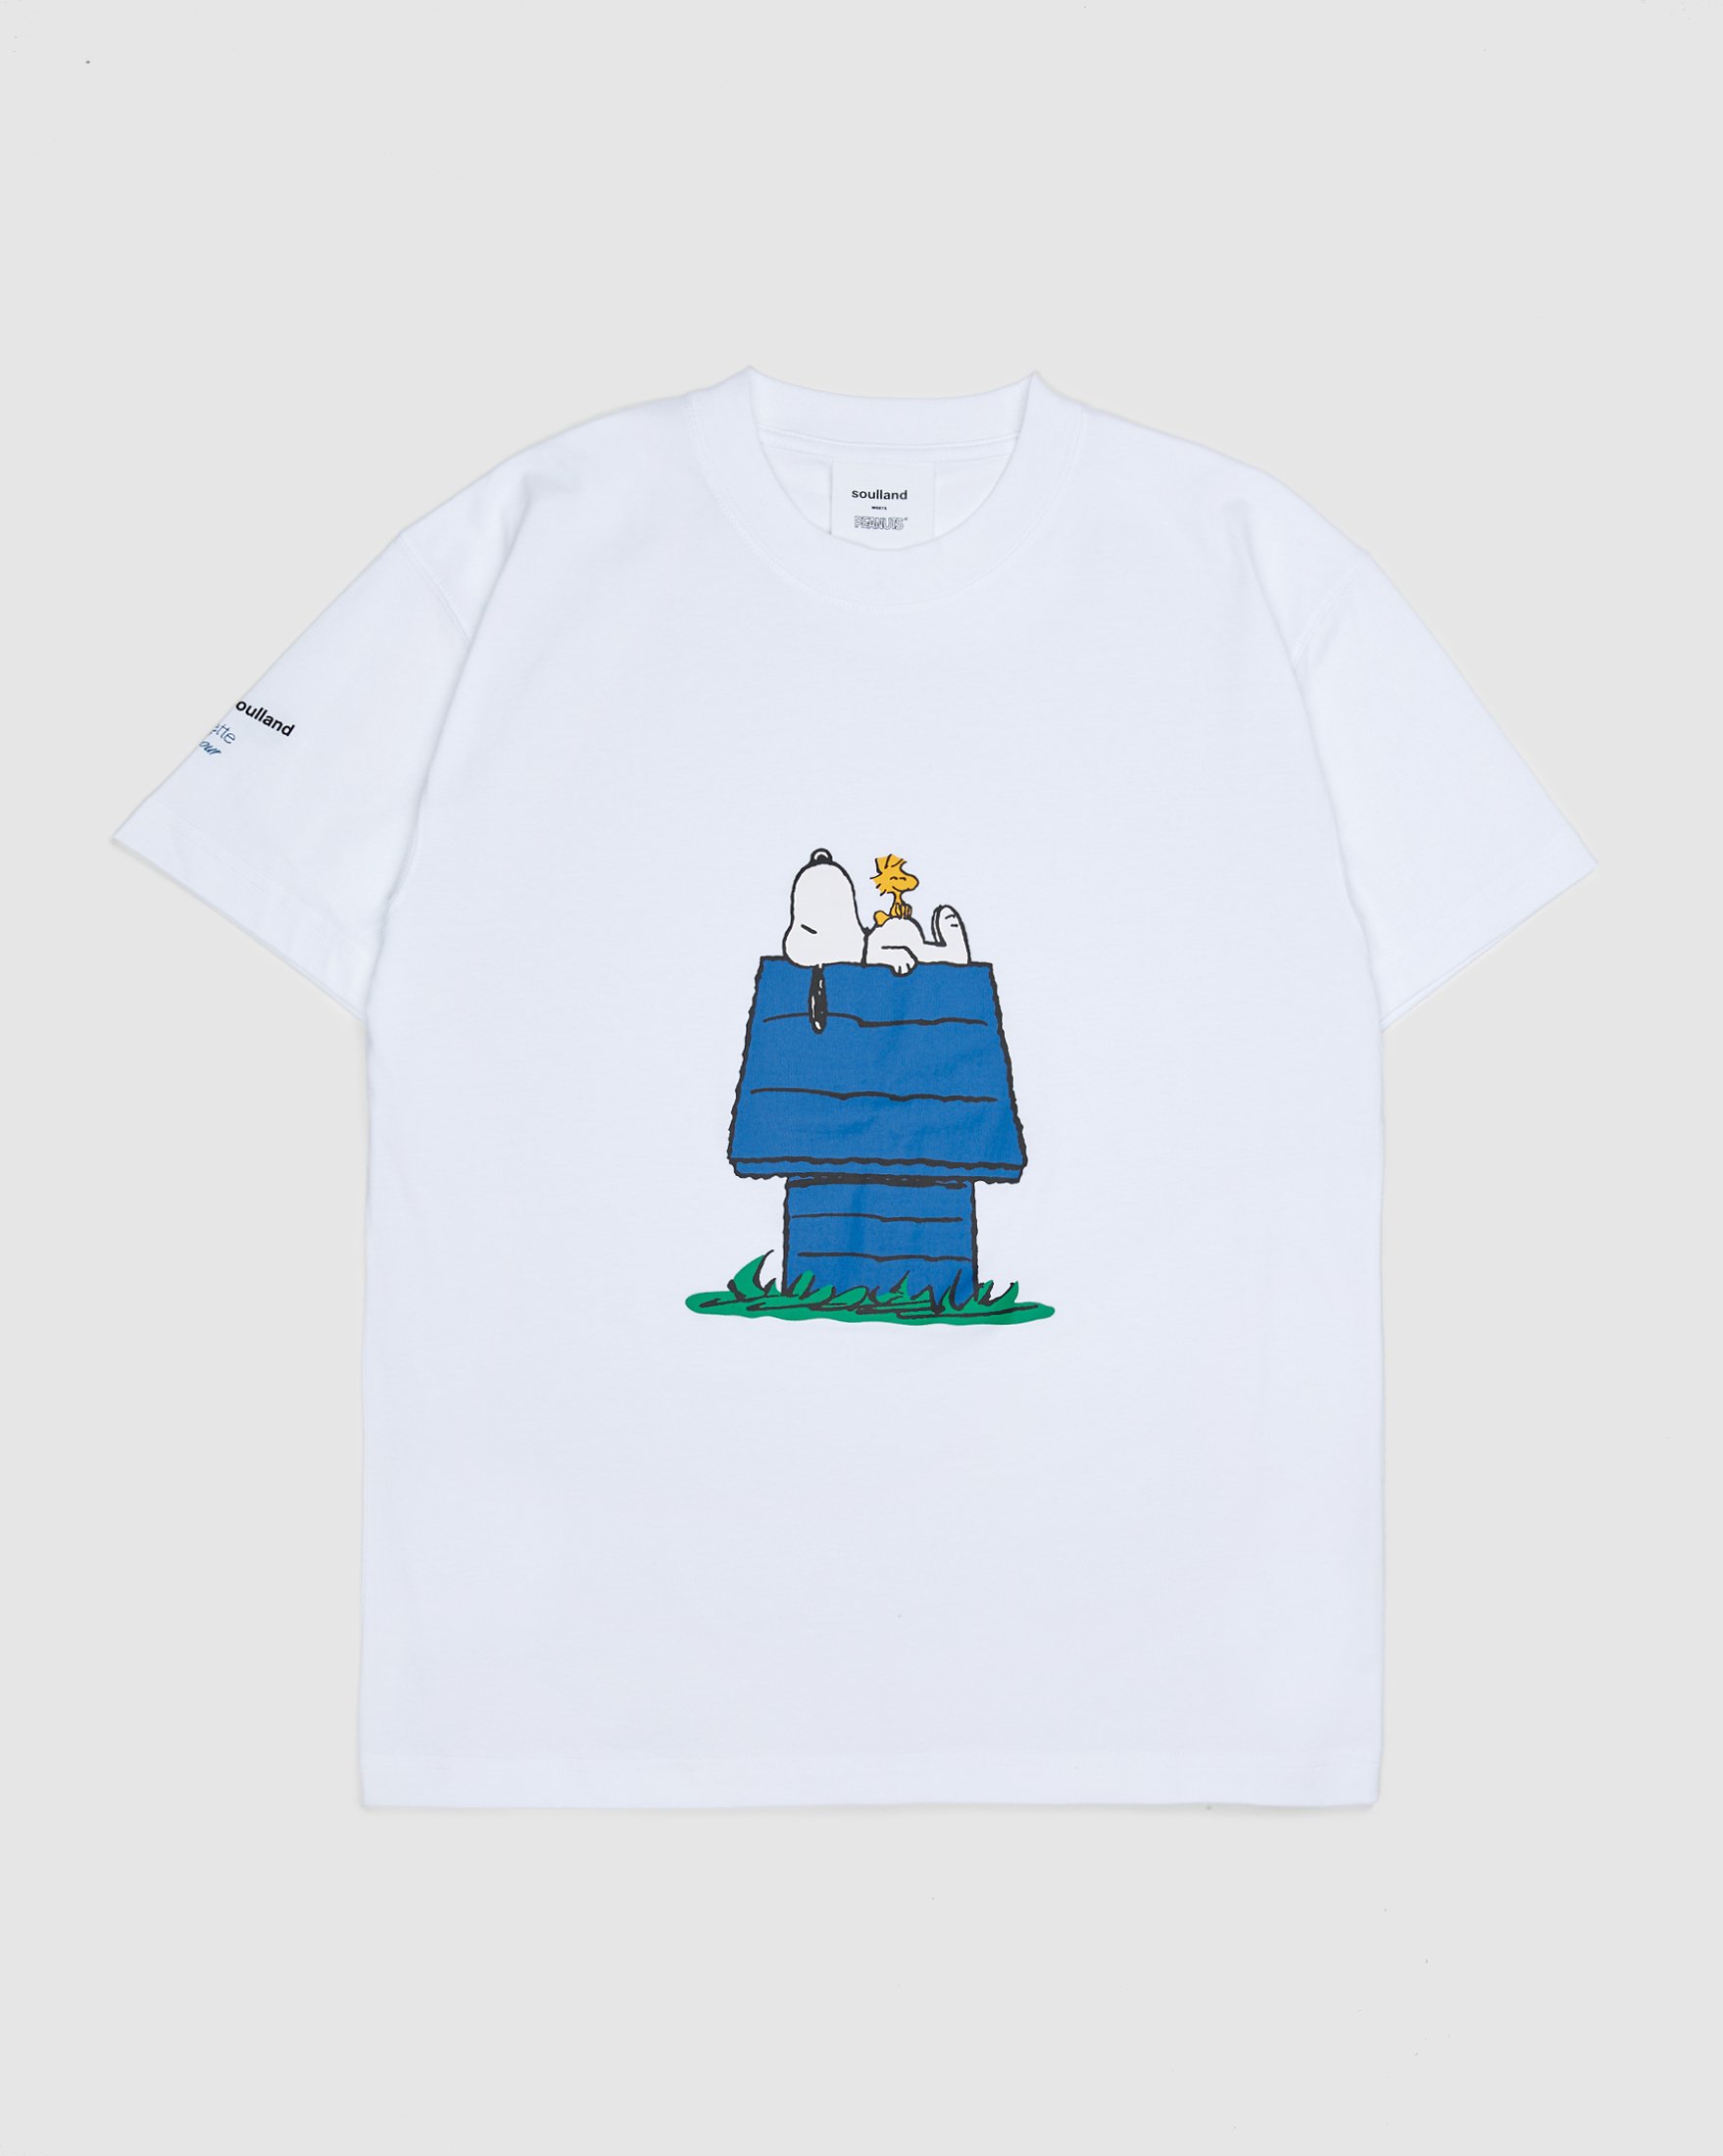 Colette Mon Amour x Soulland - Snoopy Bed White T-Shirt - Clothing - White - Image 1